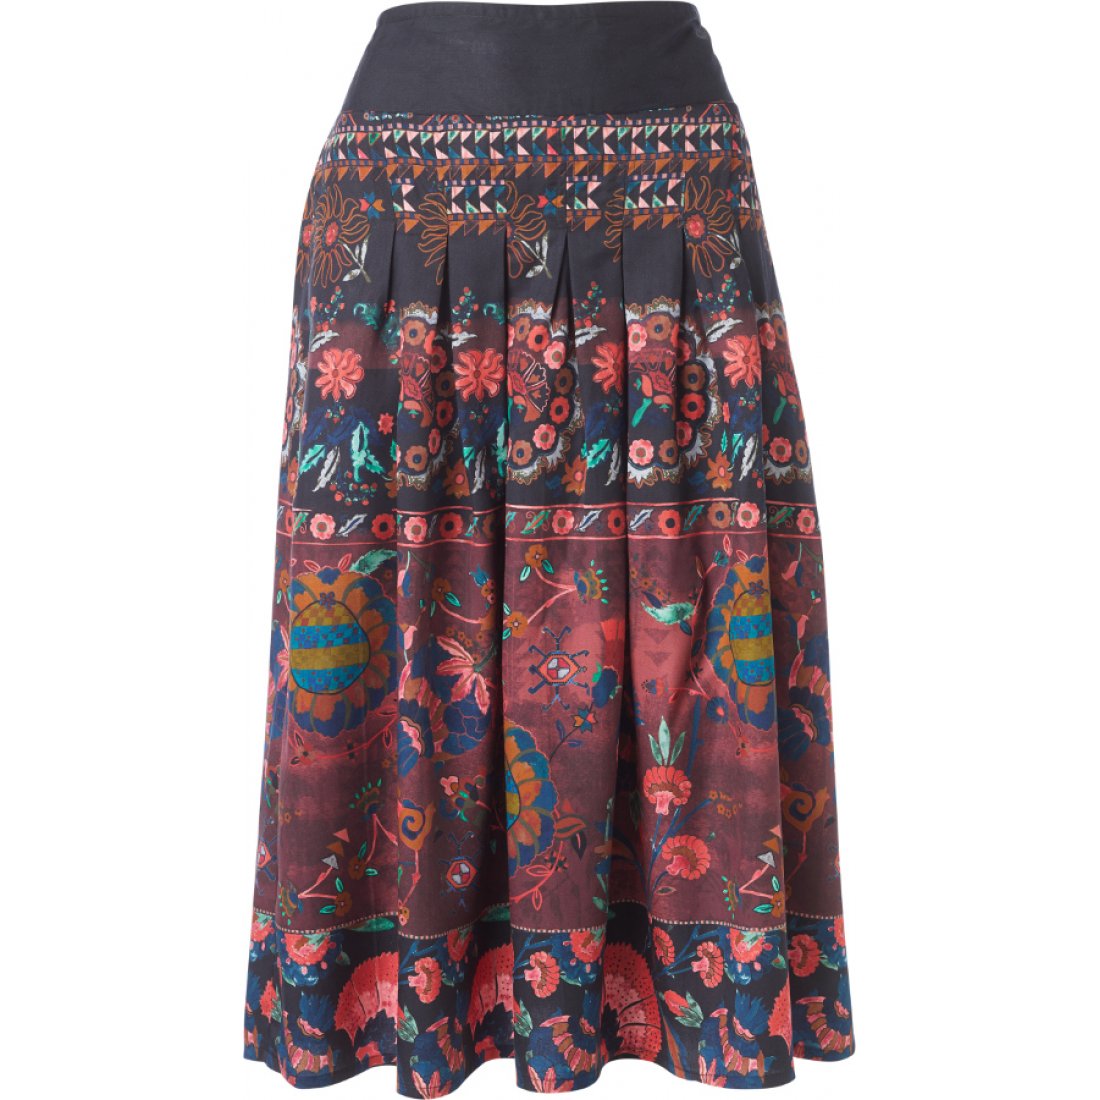 Thought Aubergine Tapestry Skirt - Thought